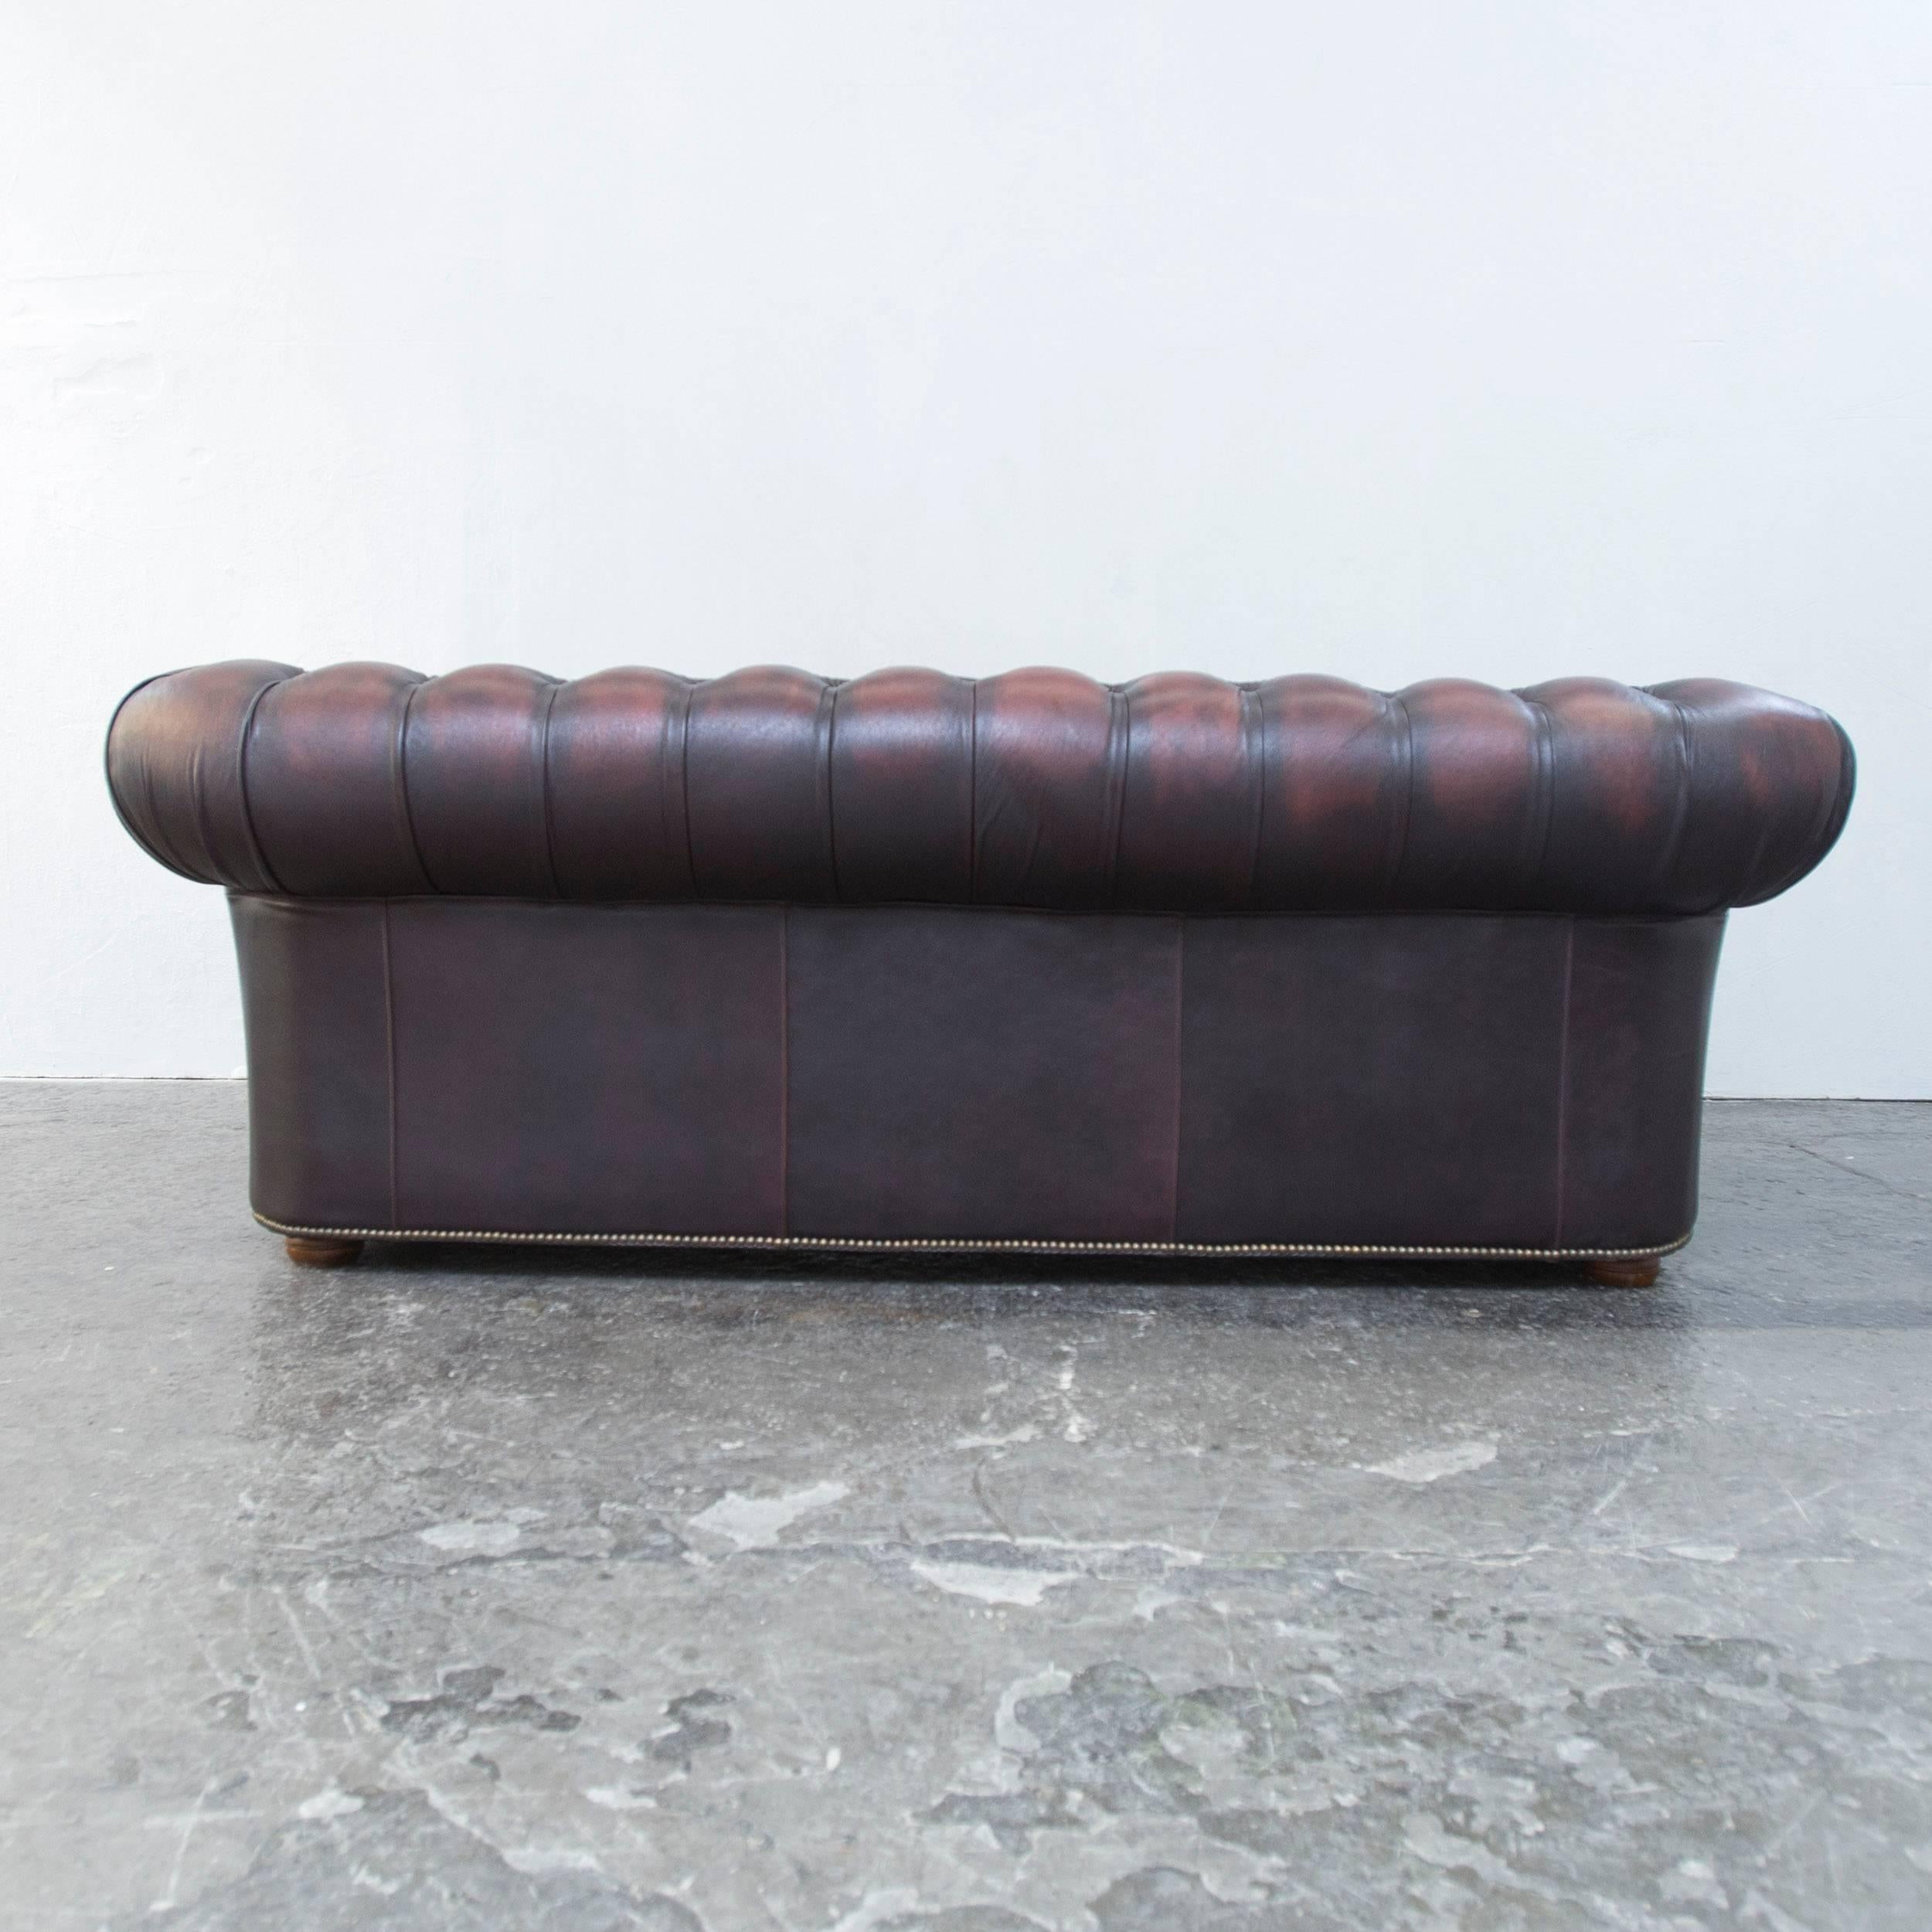 Original Chesterfield Leather Sofa Brown Three-Seat Couch Vintage Retro 4